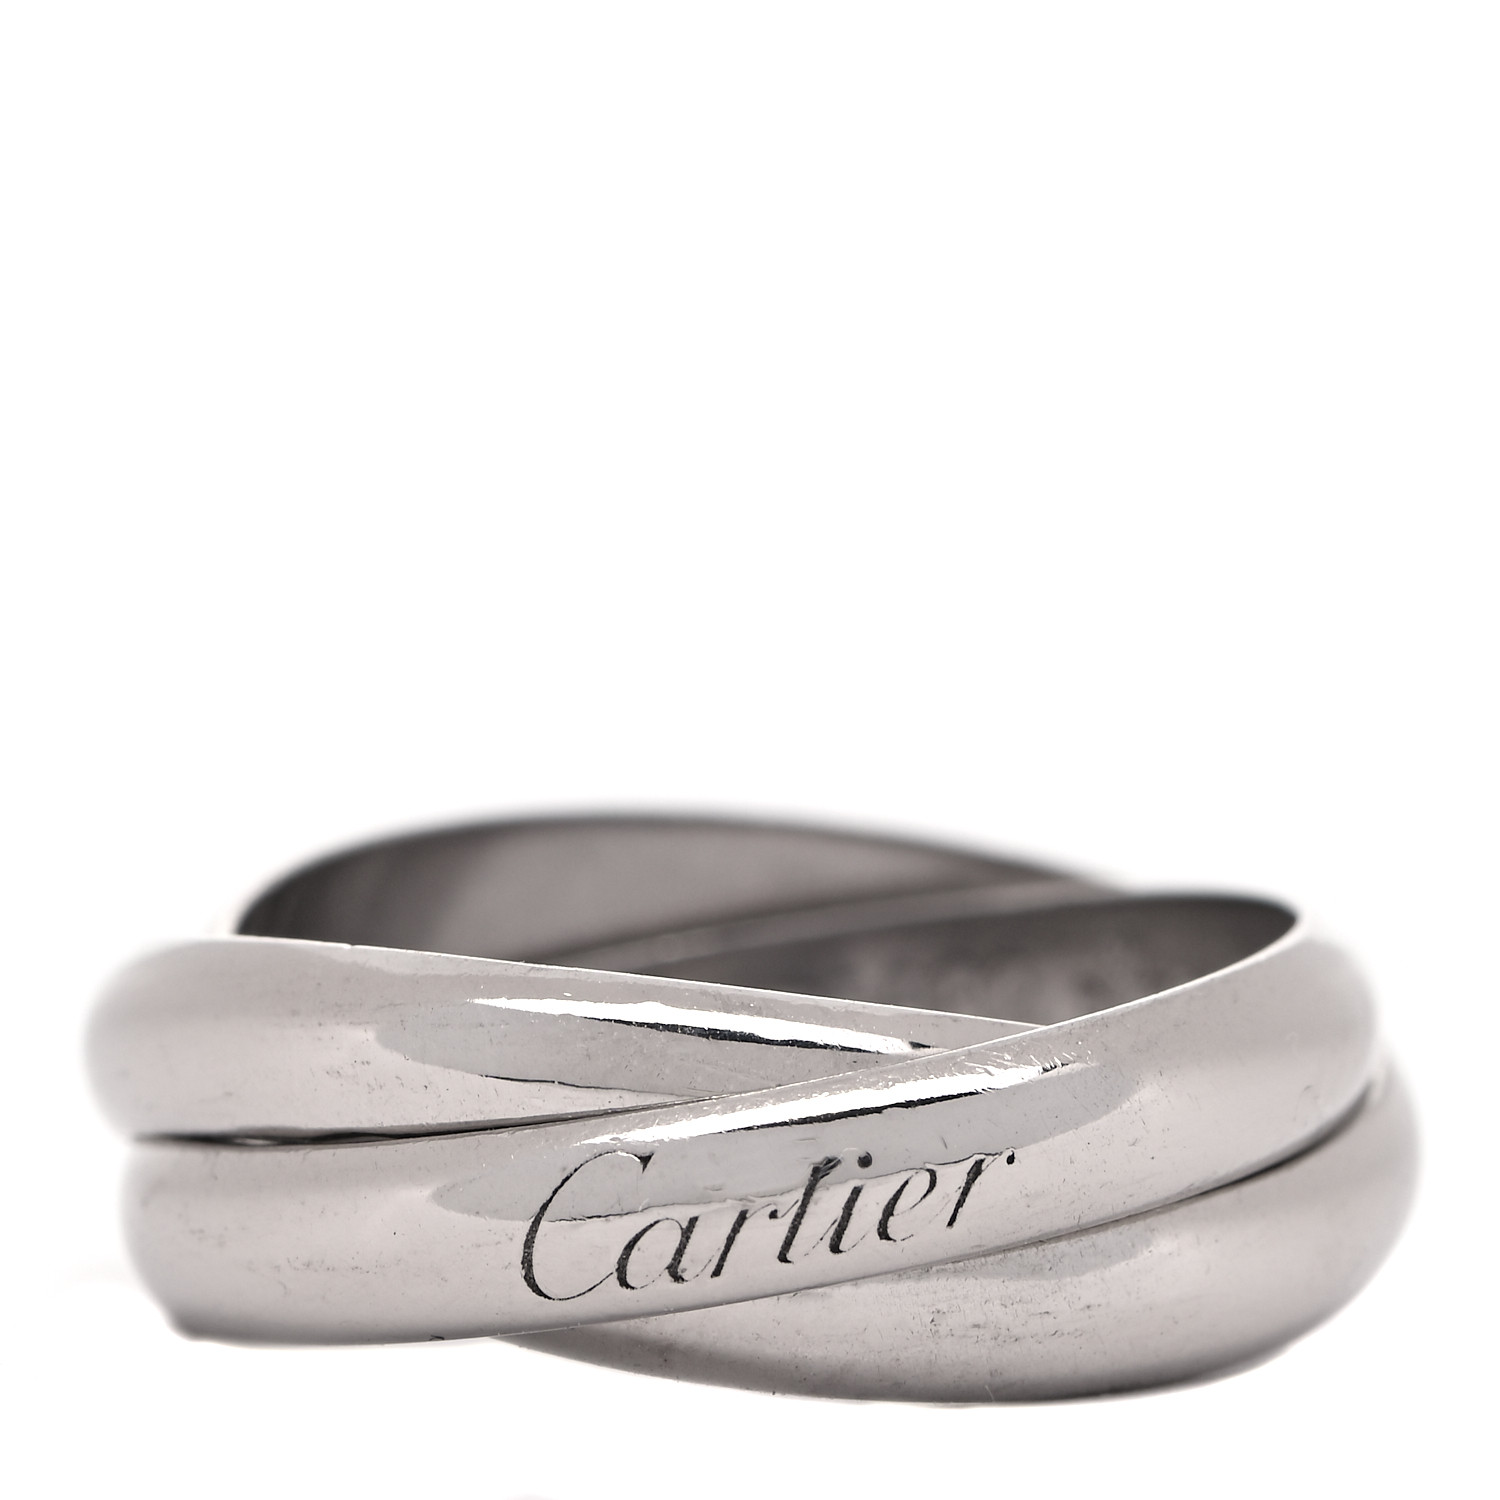 CARTIER 18K White Gold Classic Trinity Ring 57 8 831016 | FASHIONPHILE